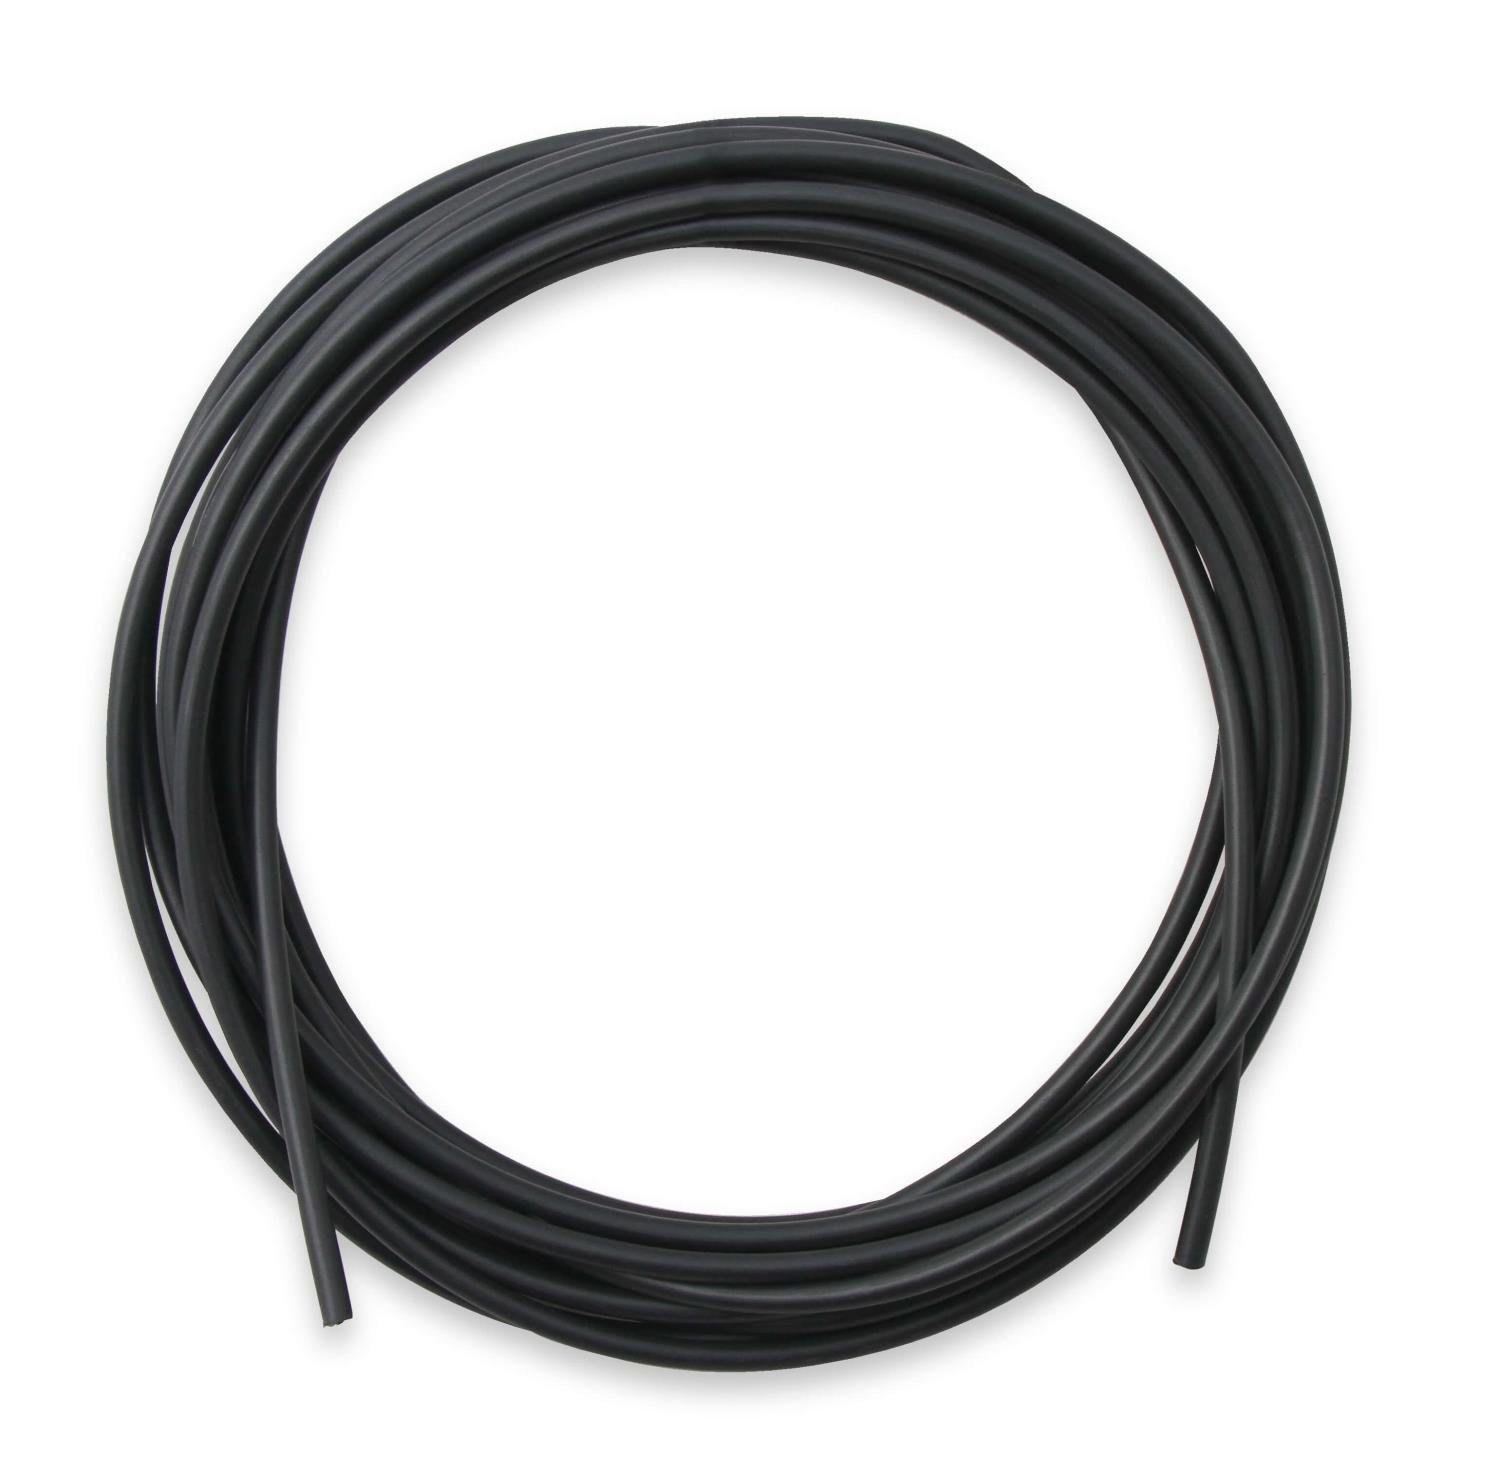 EFI Shielded 3 Conductor Cable in 25 ft.